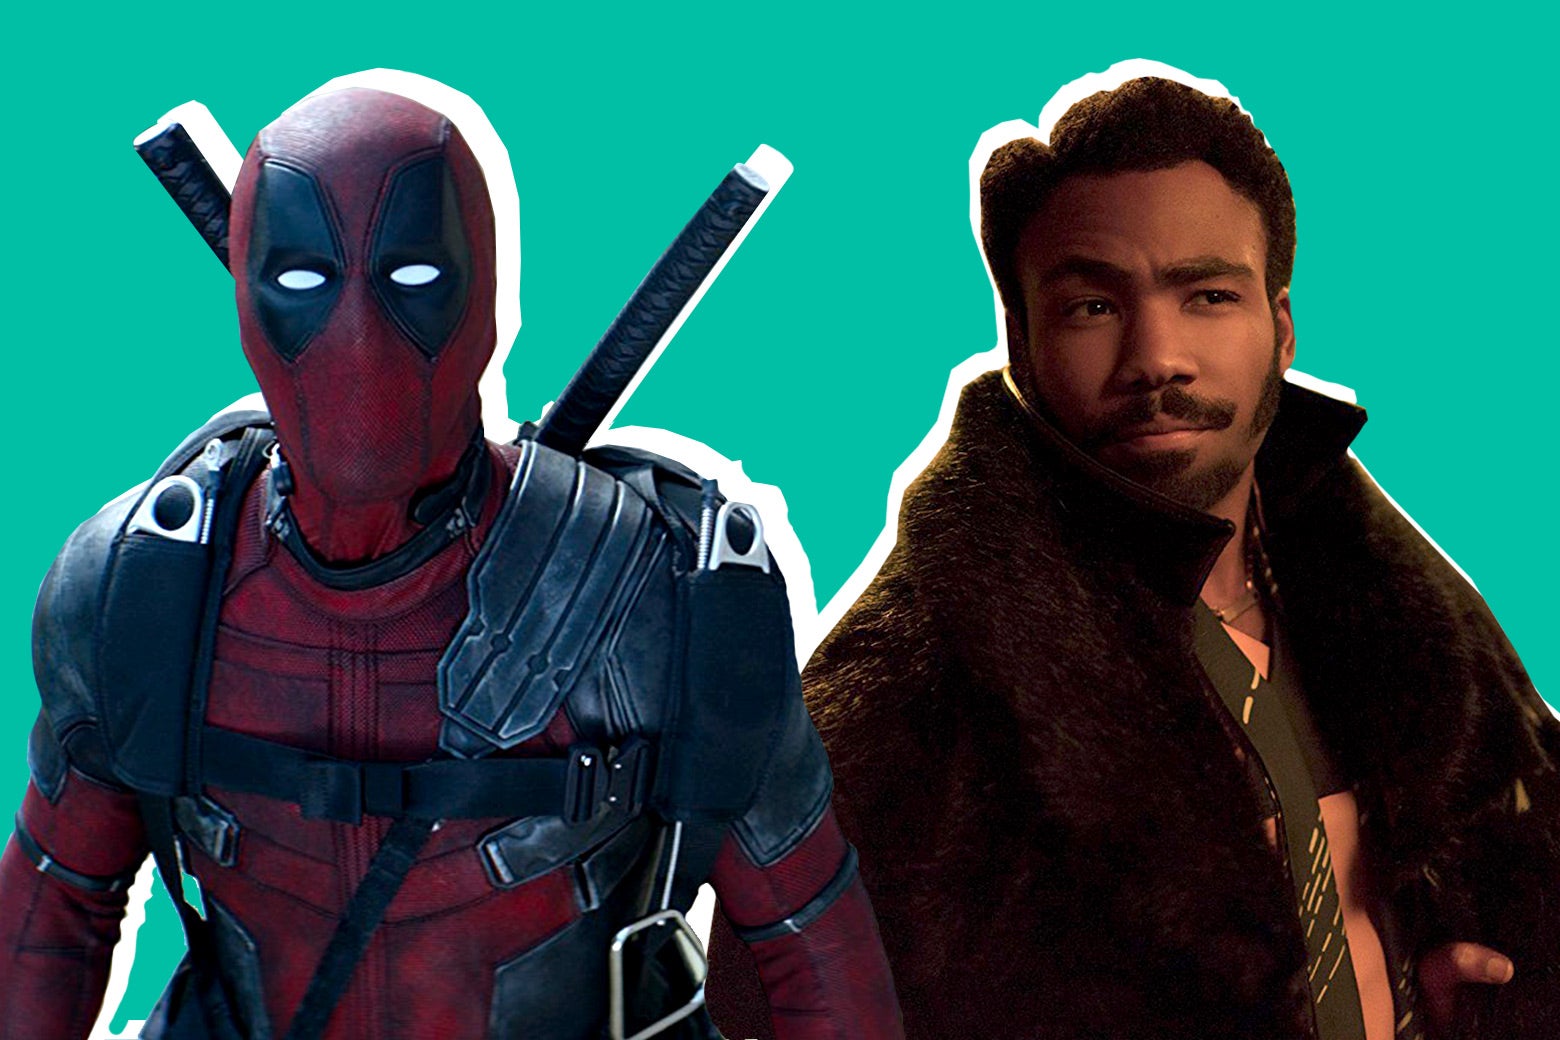 Ryan Reynolds in Deadpool 2 and Donald Glover in Solo: A Star Wars Story.